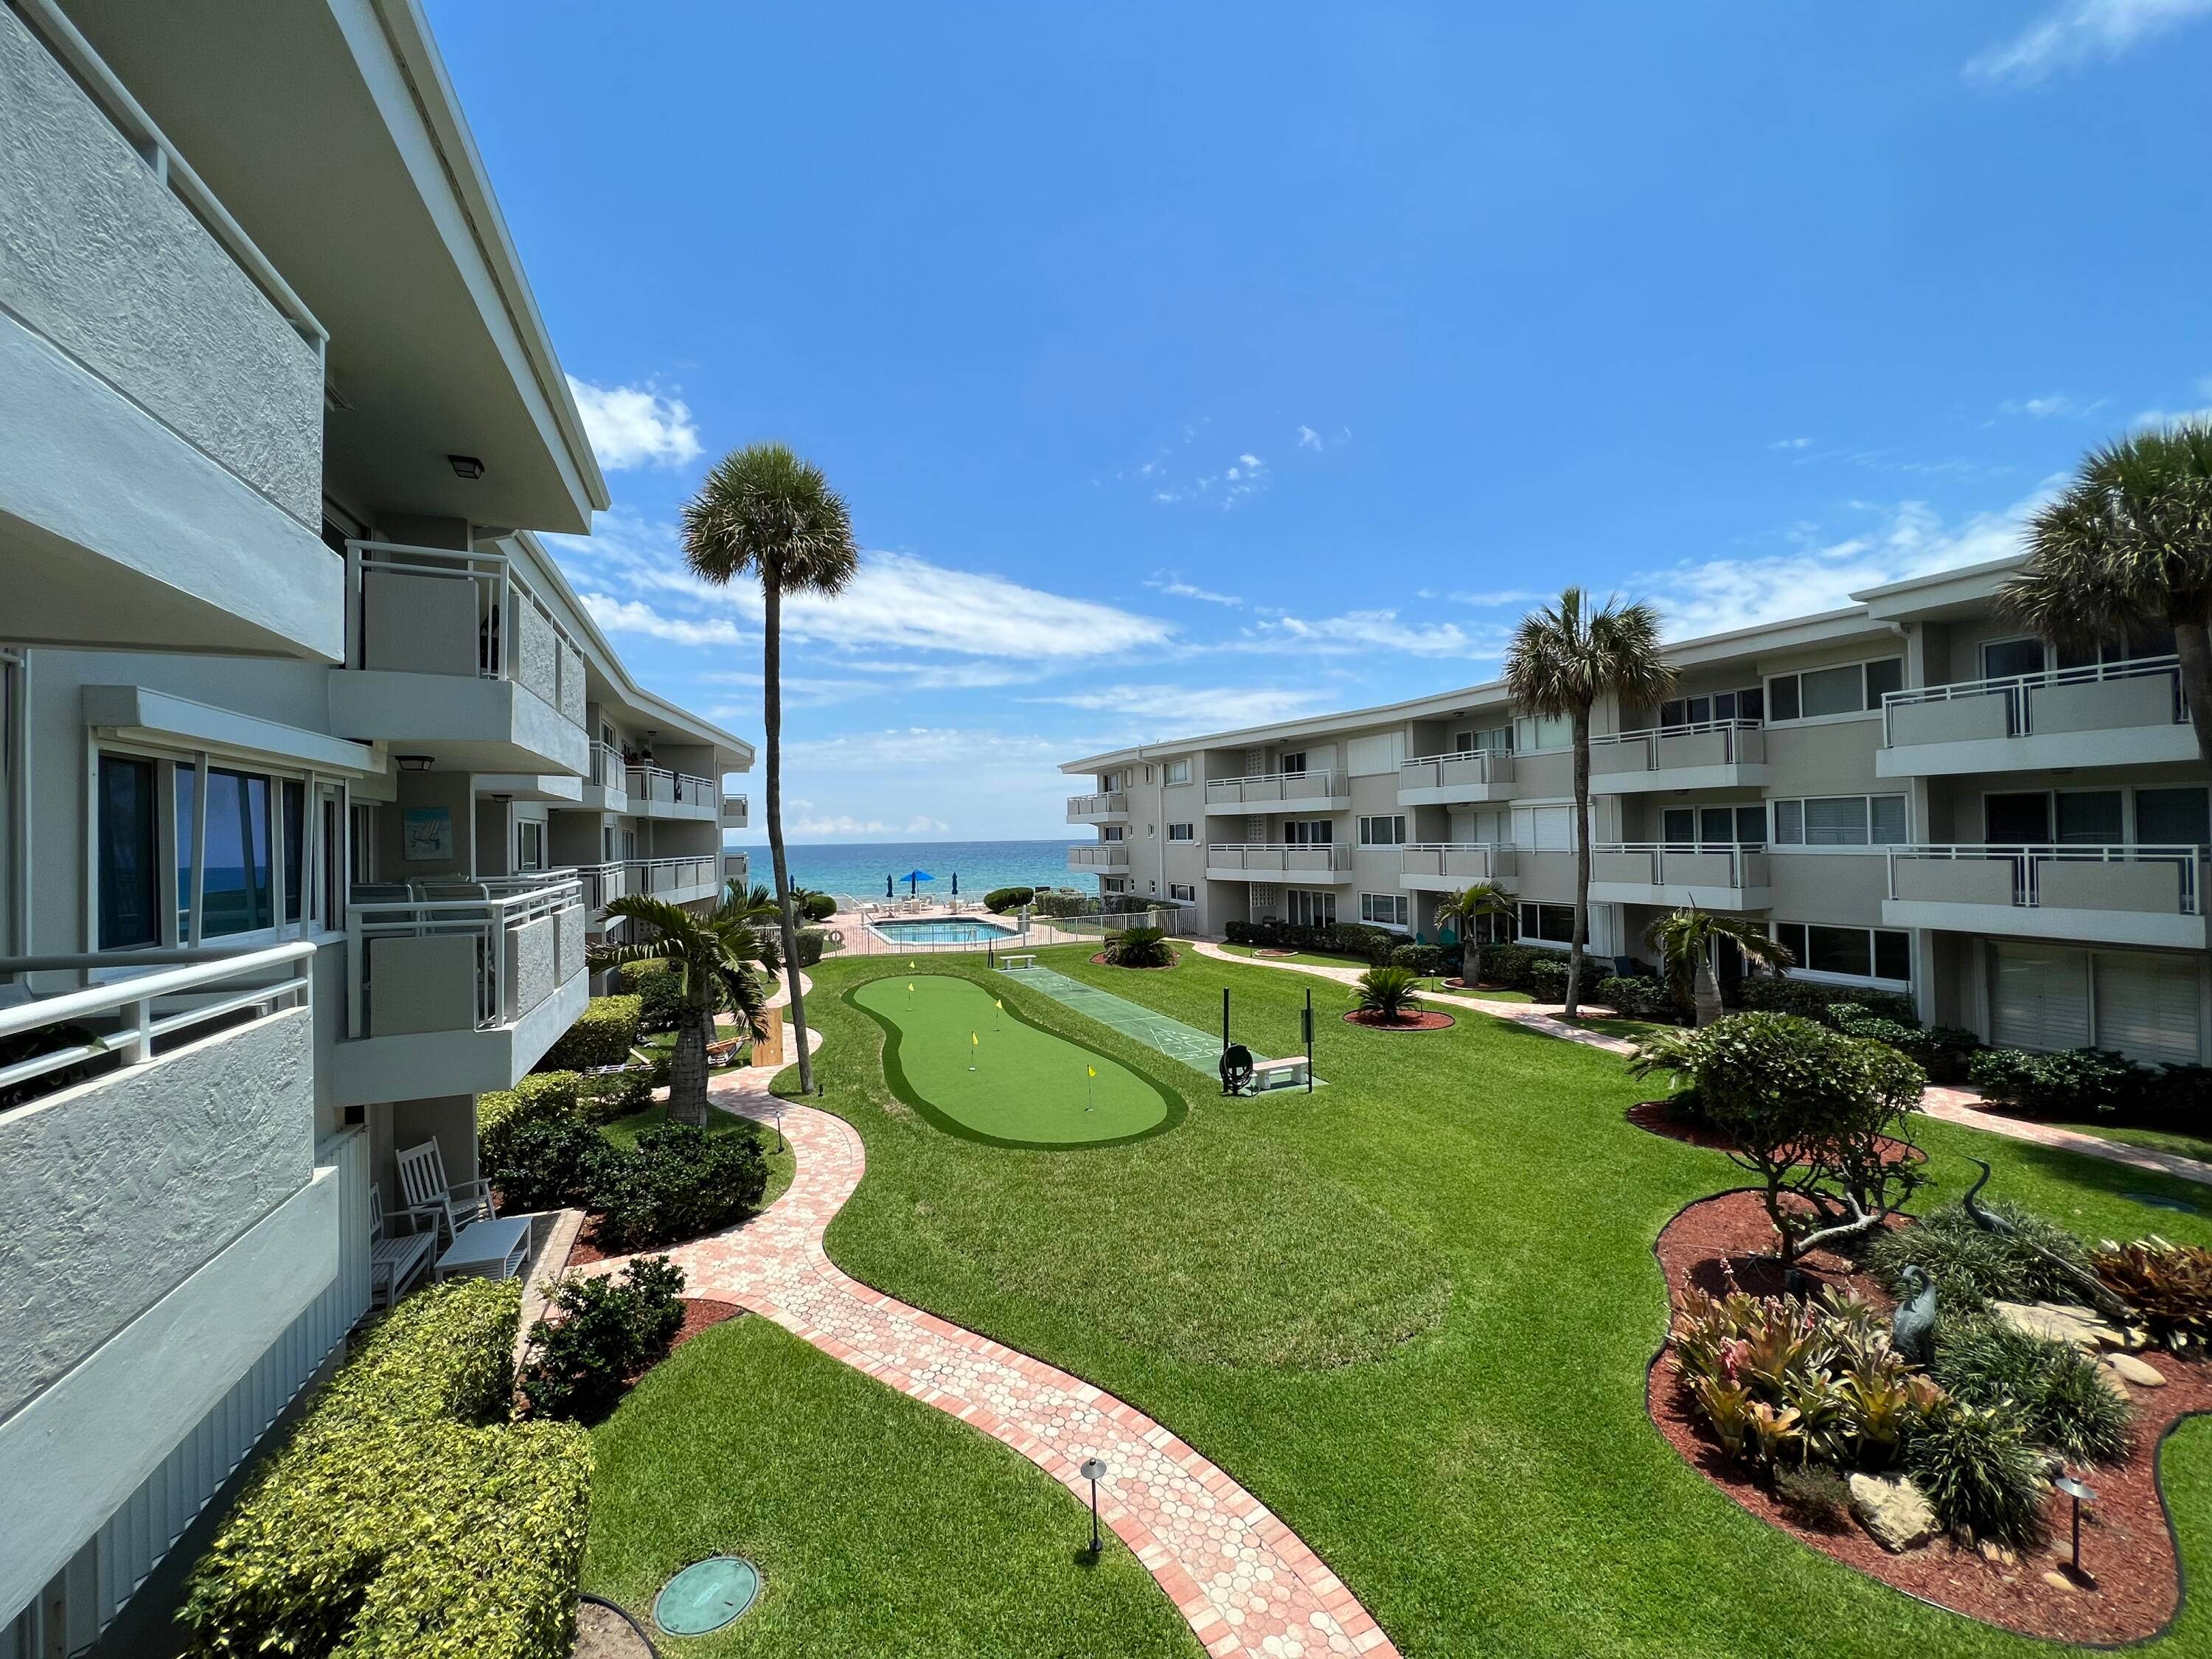 Beautiful front property with ocean views from the the balcony of this lovely 2 bedroom, 2 full bath condo.